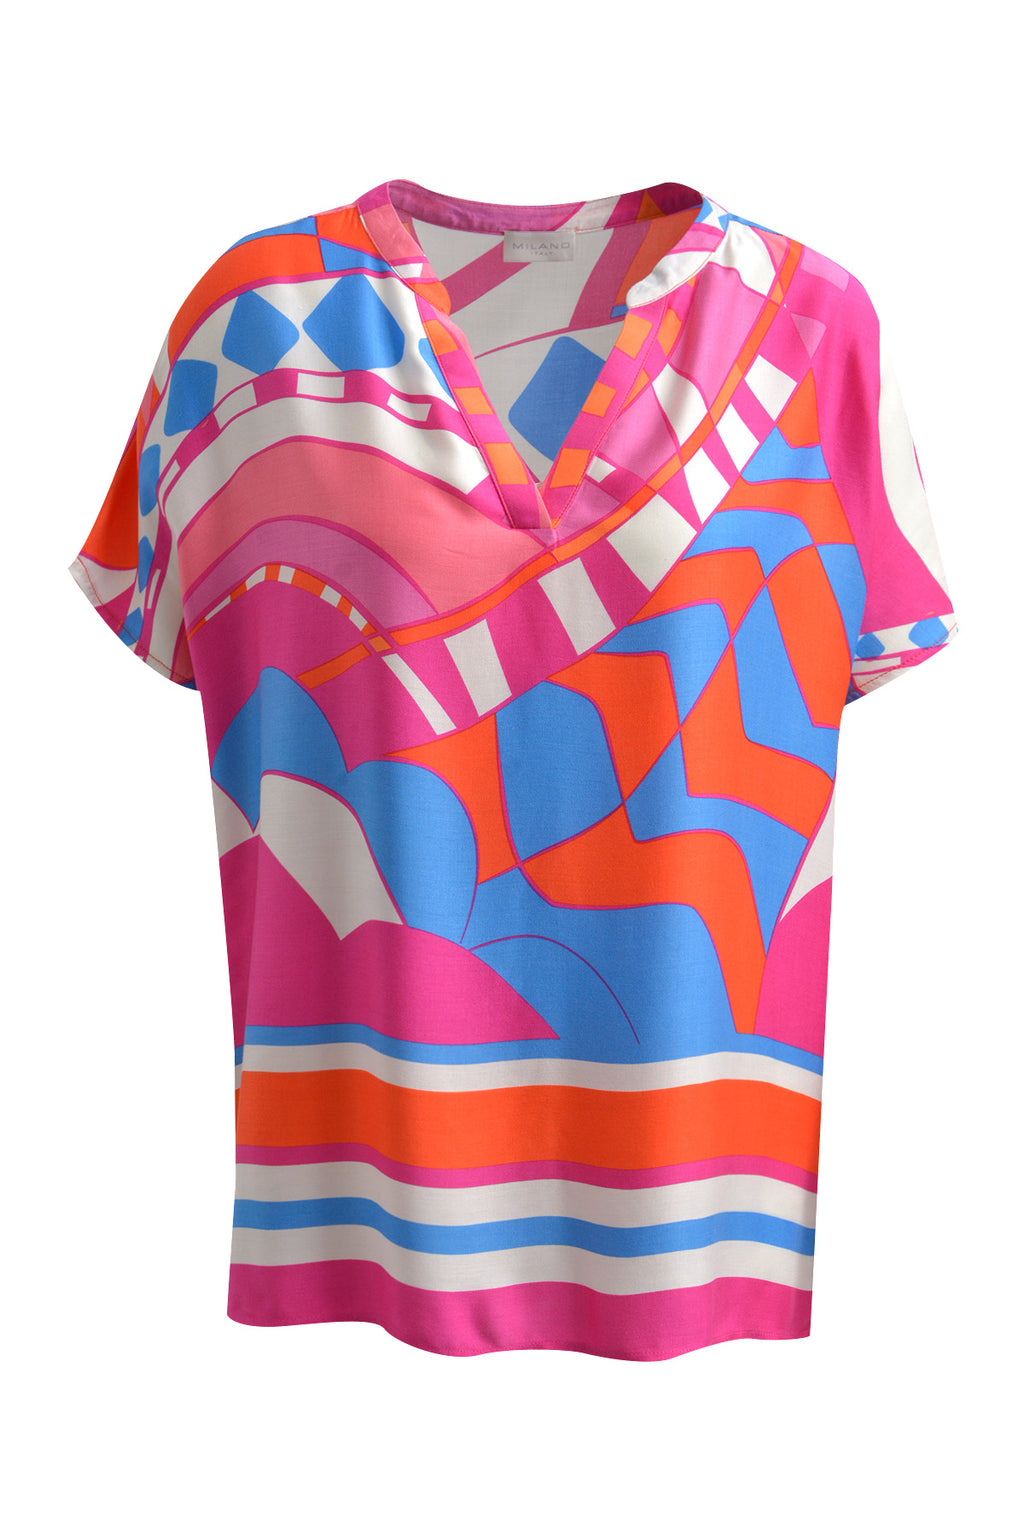 Wonder colourful  multi prints from the Milano Italy collection.  Featuring  V neck with drop shoulder in bright pink, blue, orange and ivory tones with small size splits